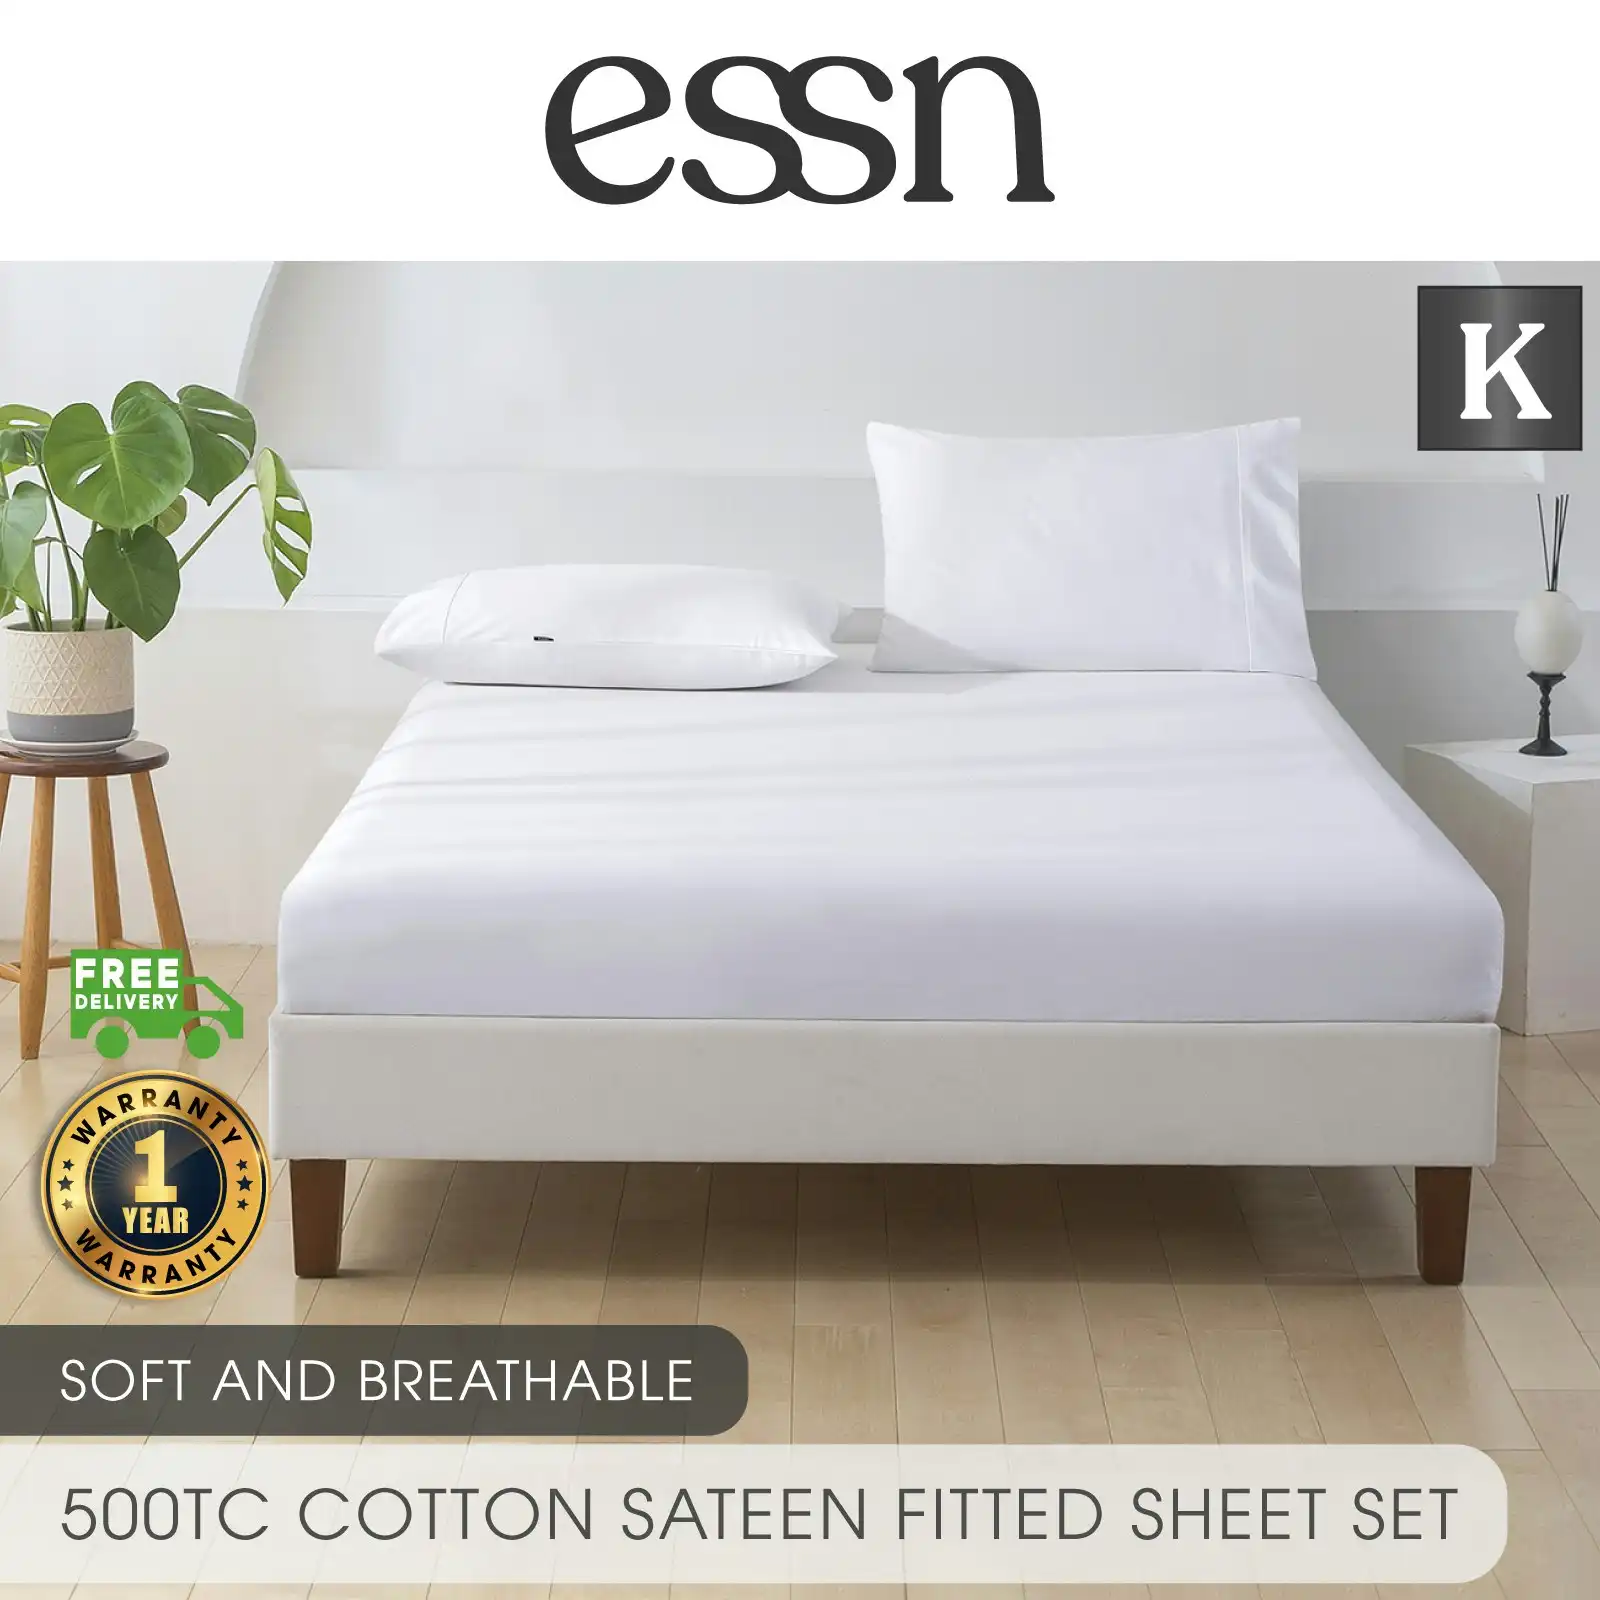 ESSN 500TC Cotton Sateen Fitted Sheet Set White King Bed